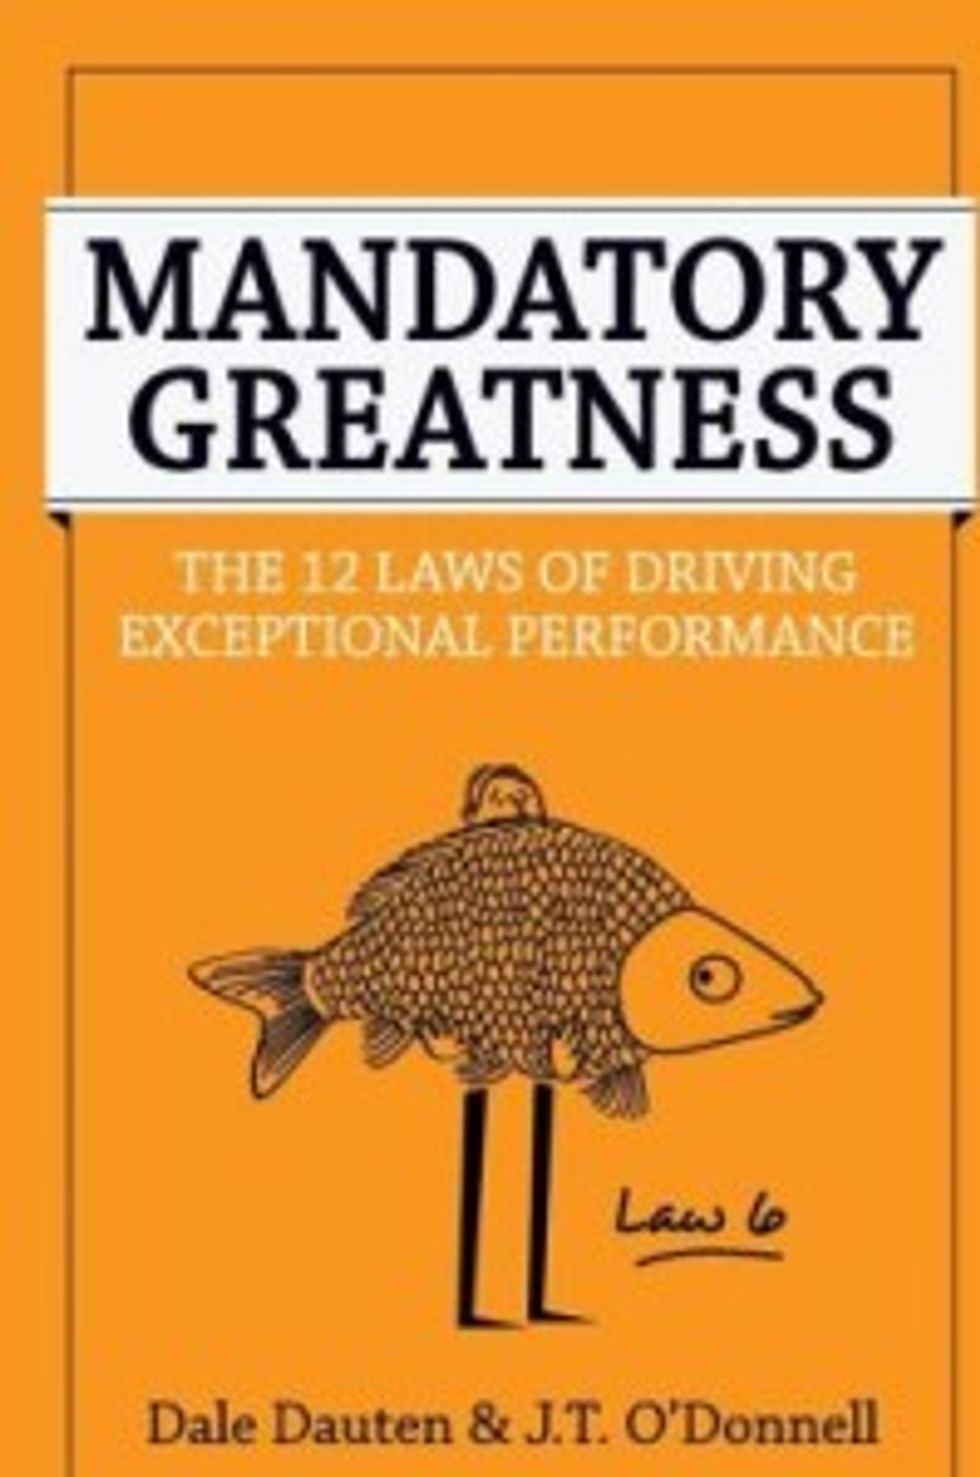 WEBINAR: The 12 Laws Of Driving Exceptional Performance